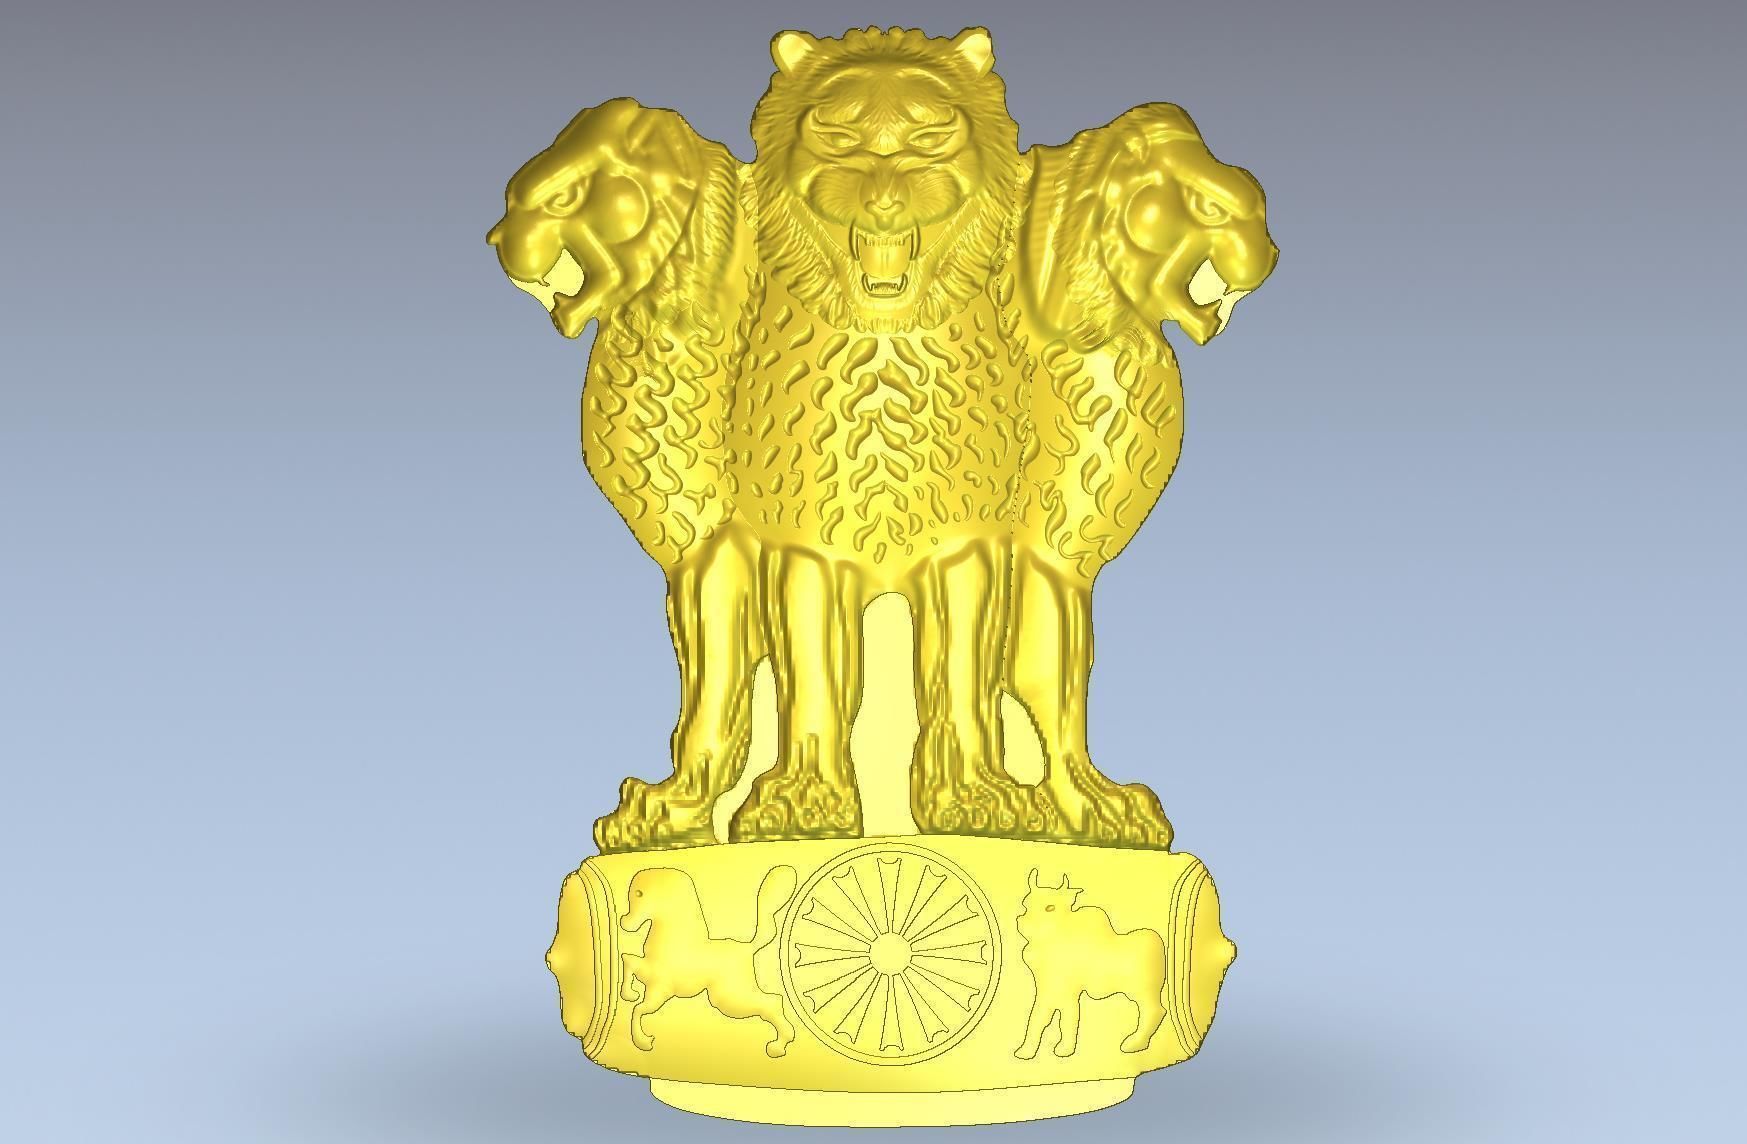 Buy santarms Wooden Ashoka Pillar Or Ashok Stambh for Table - Golden (8  Inch) Online at Low Prices in India - Amazon.in